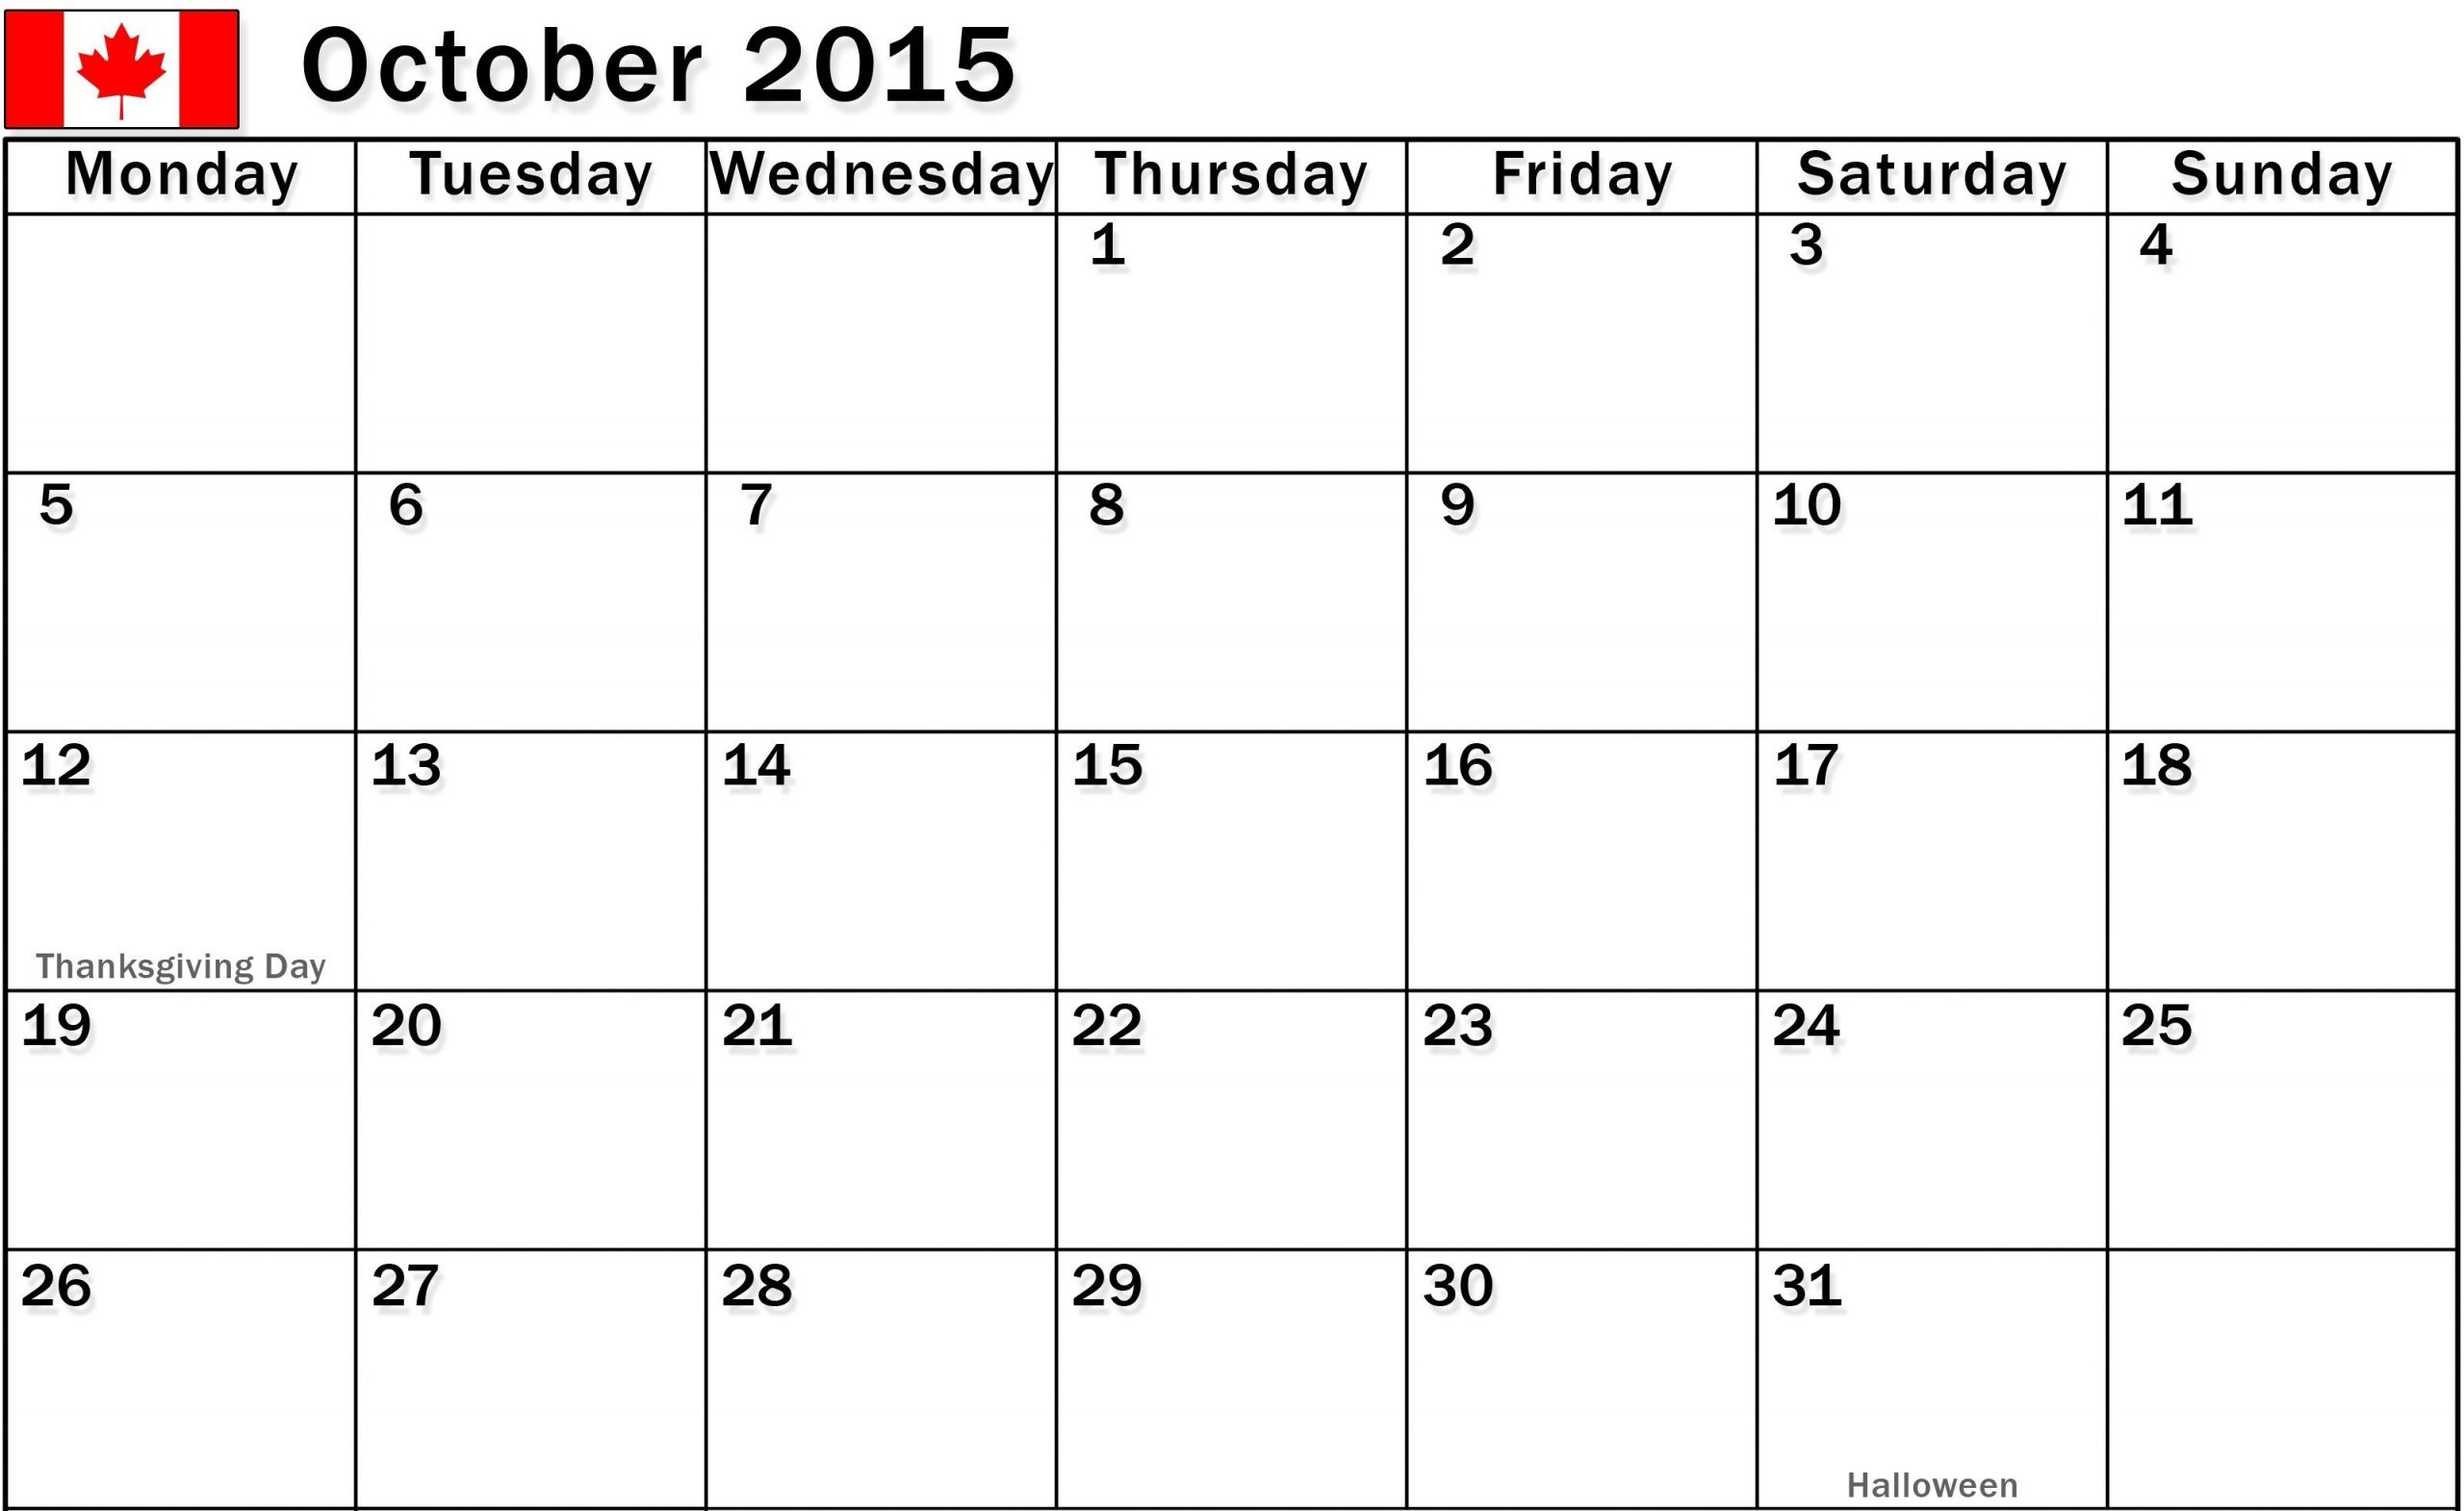 October 2015 Calendar Fillable, Printable Pdf Pictures, Images throughout Fillable Monthly Calendar December 2015